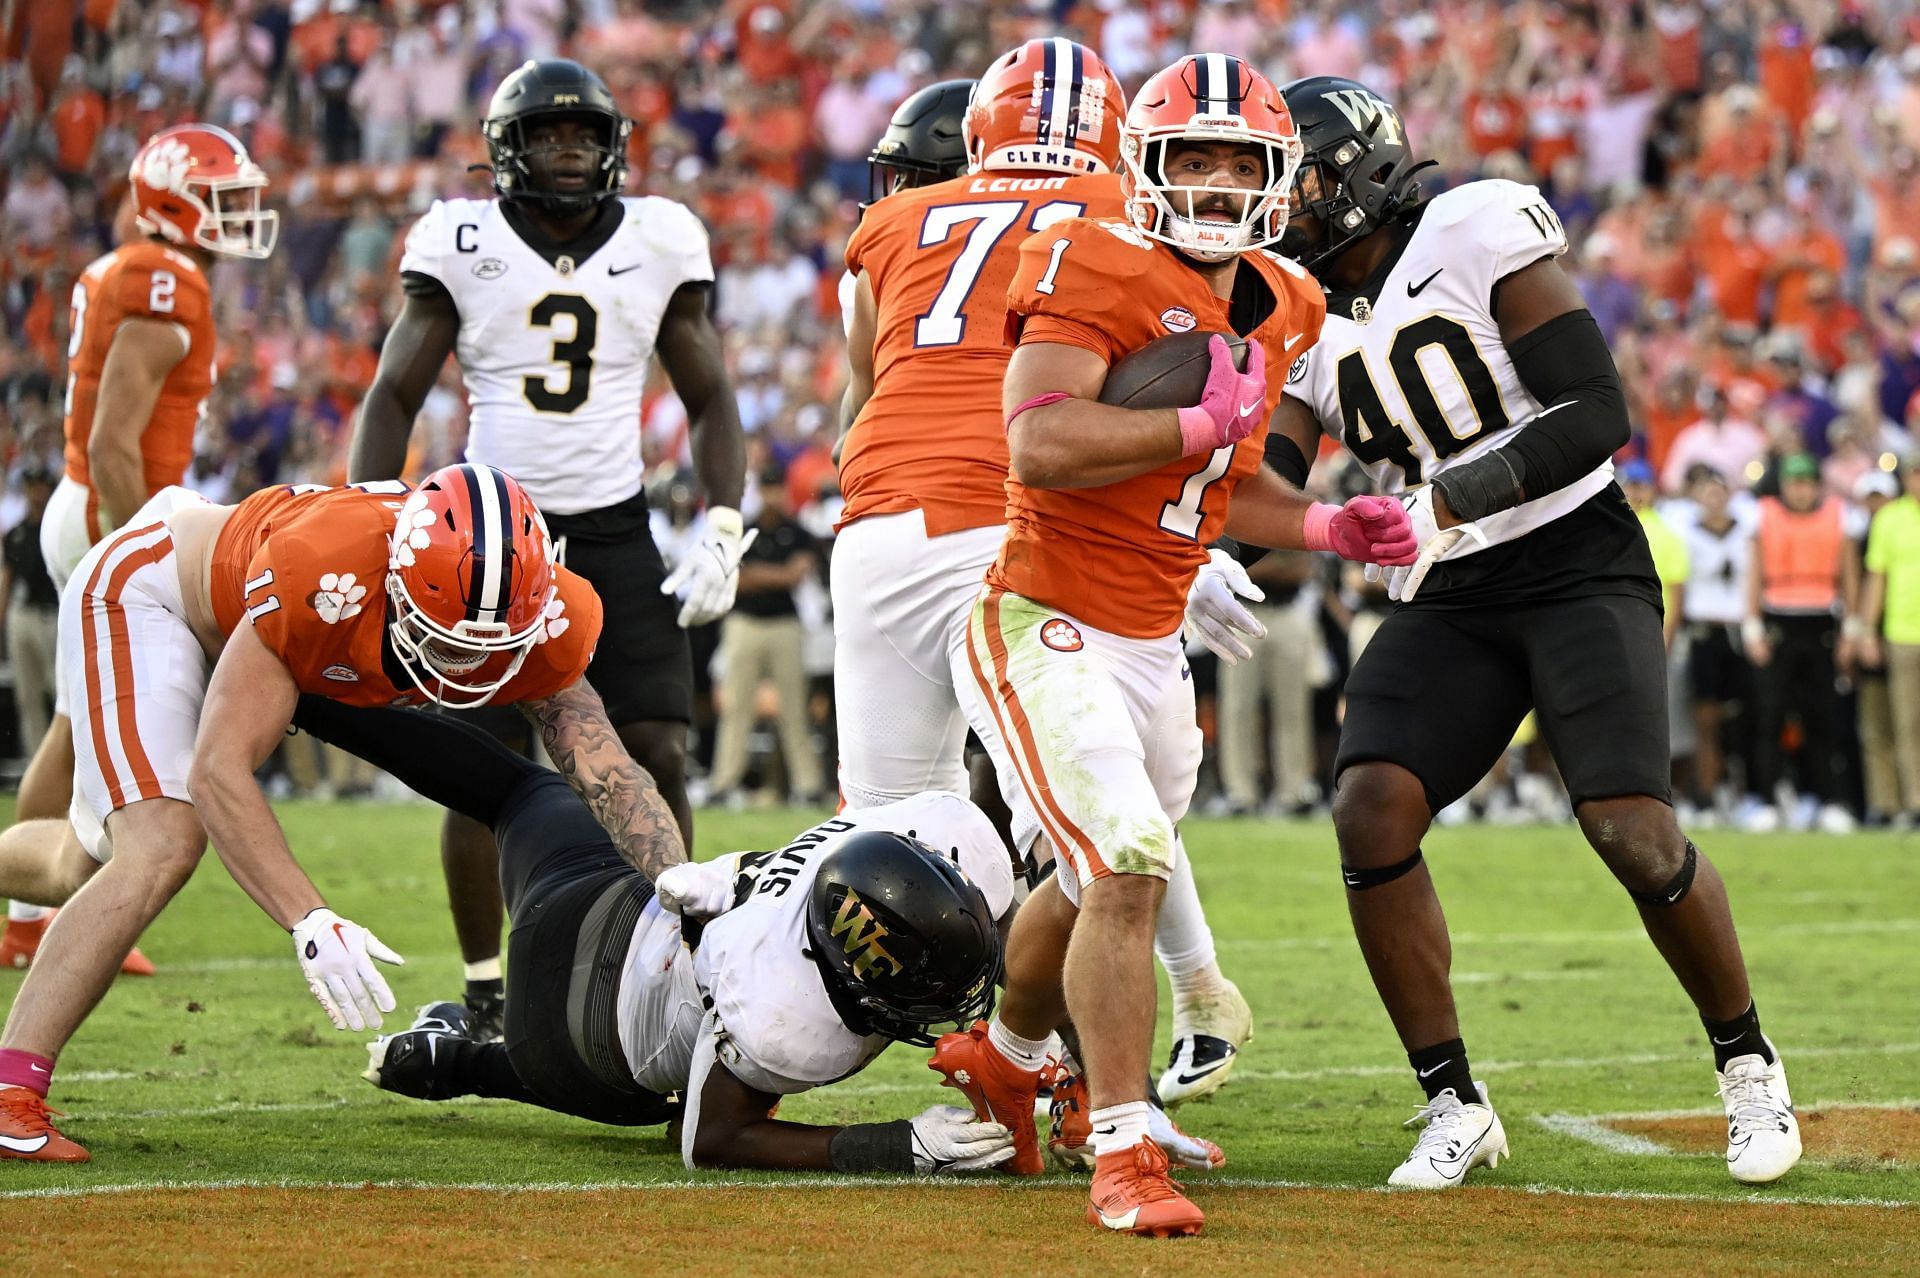 Will Shipley #1 of the Clemson Tigers scores a touchdown against the Wake Forest Demon Deacons